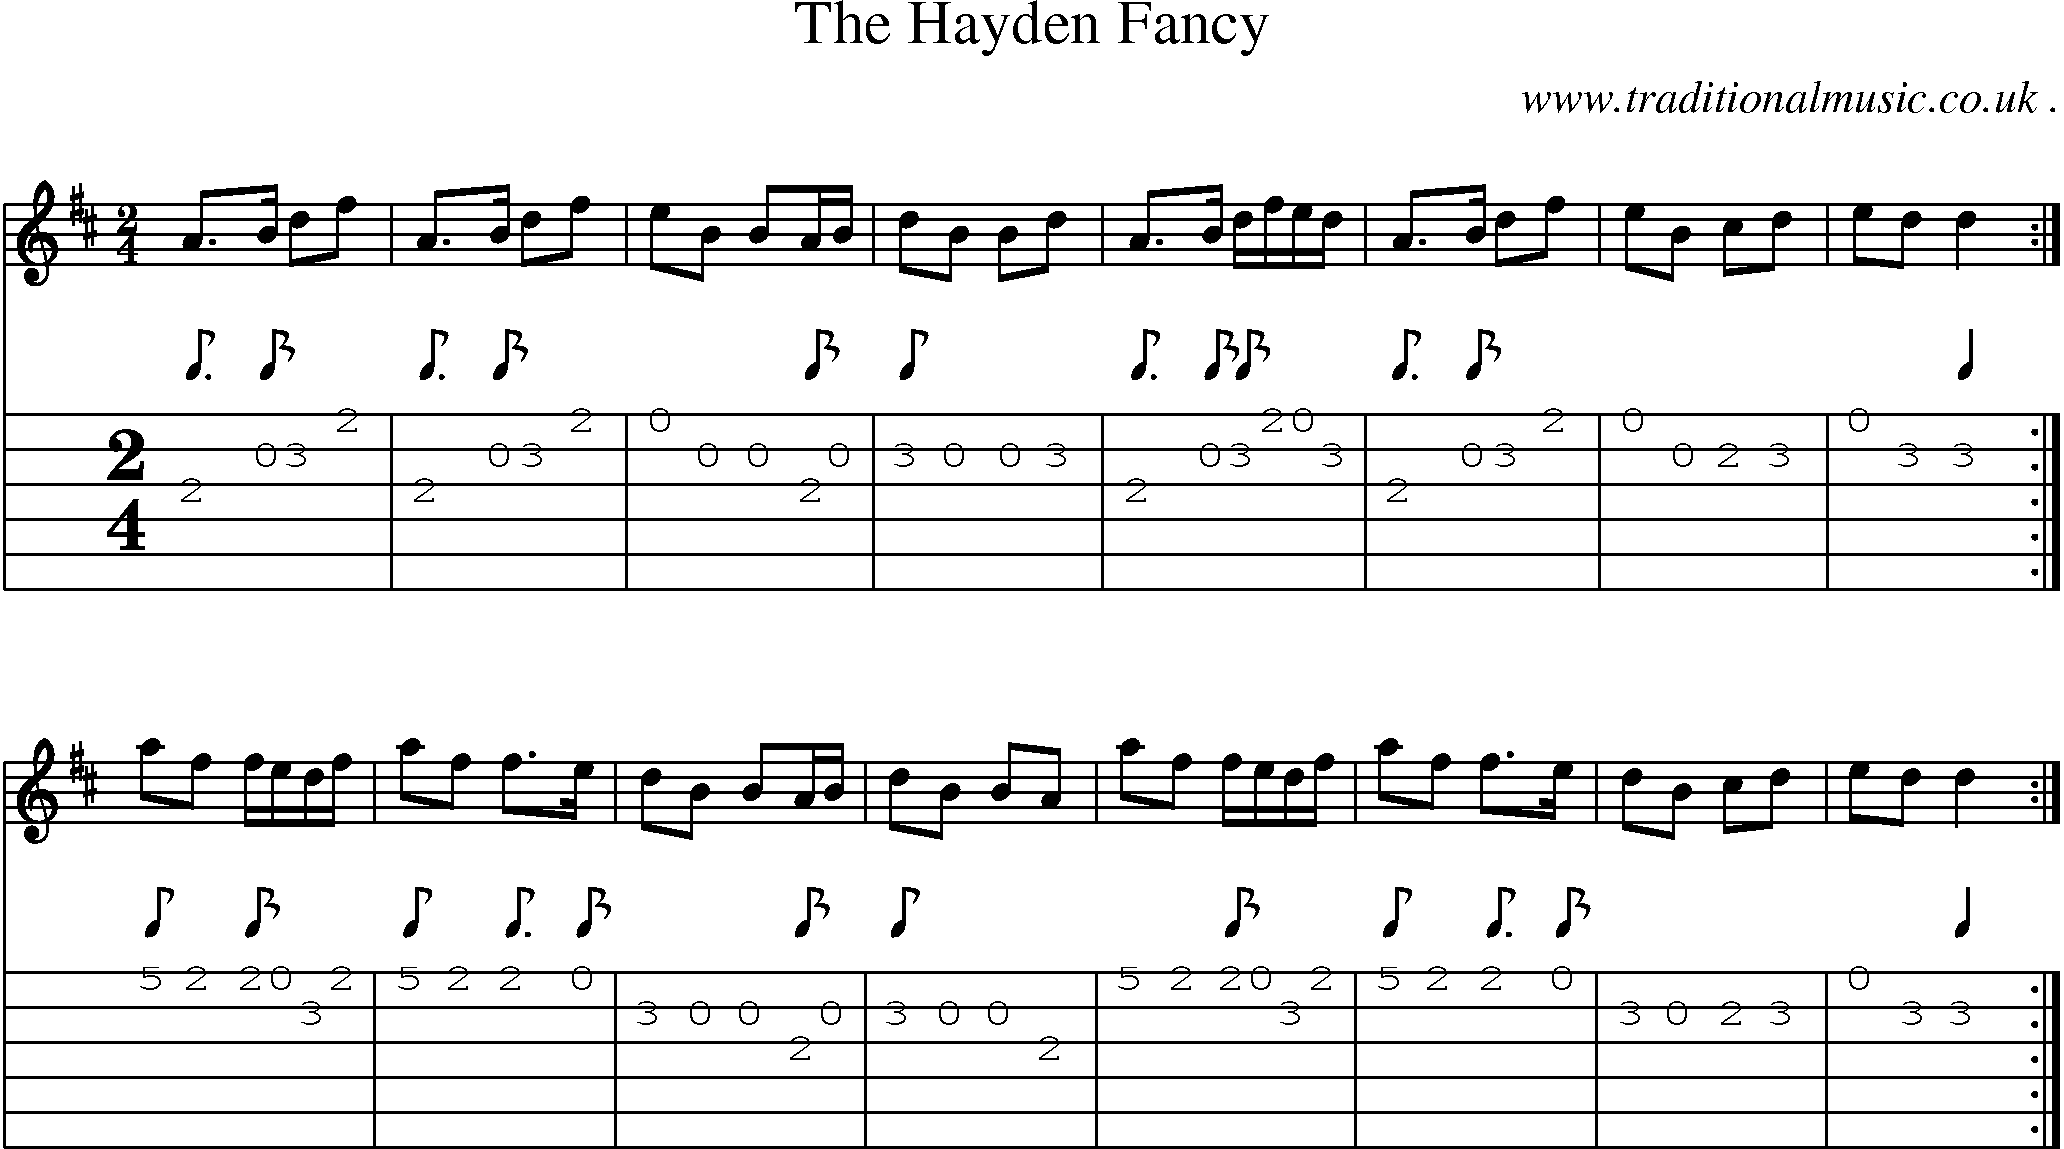 Sheet-Music and Guitar Tabs for The Hayden Fancy